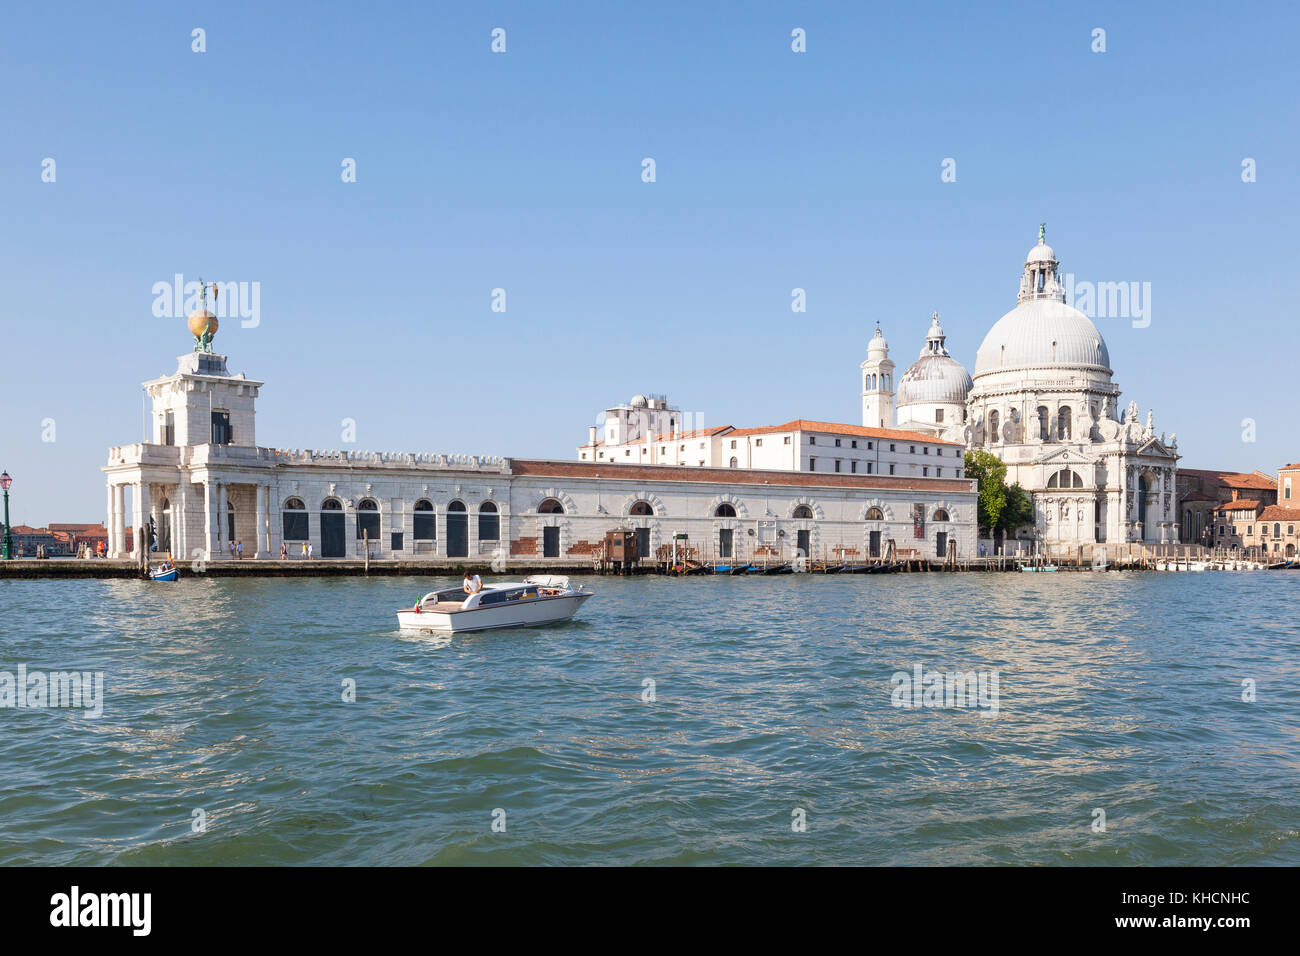 Punta della Dogana, or the old Customs building, Grand Canal, Venice, Veneto, Italy with a water taxi in the foreground Stock Photo